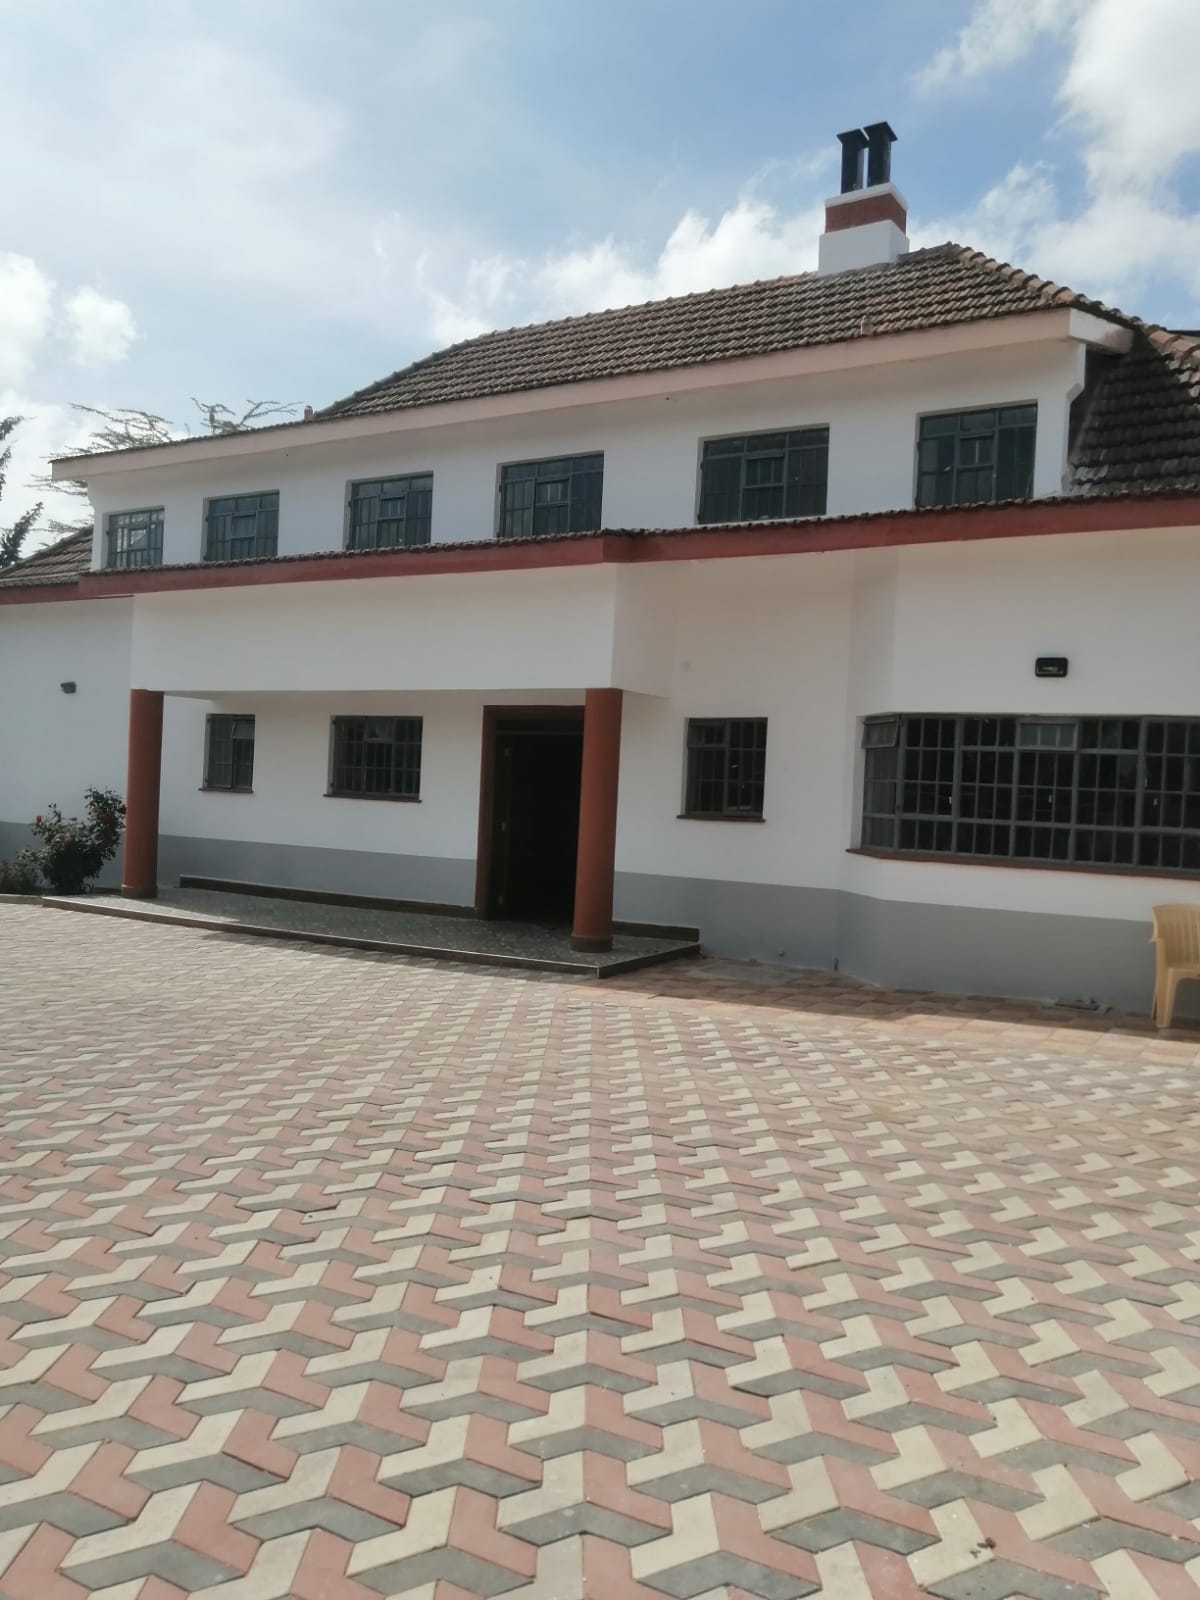 5 bedroom mansionete sits on 1/2 acre Karen near Nairobi academy 120m EXCLUSIVE